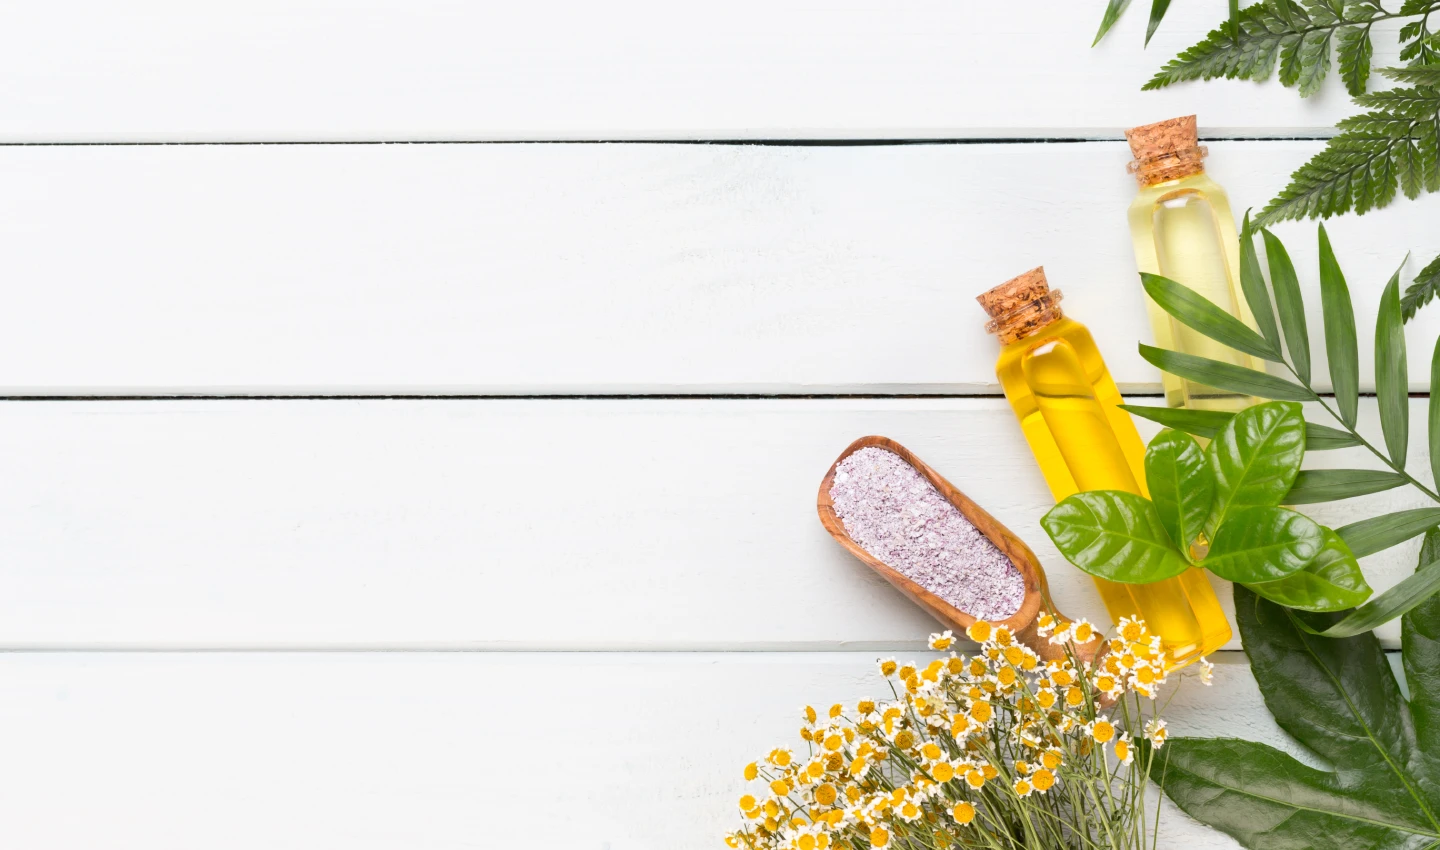 A photo of natural after-sun remedies including bottles of coconut oil, aloe vera gel, and lavender essential oil, alongside fresh flowers, all against a white background